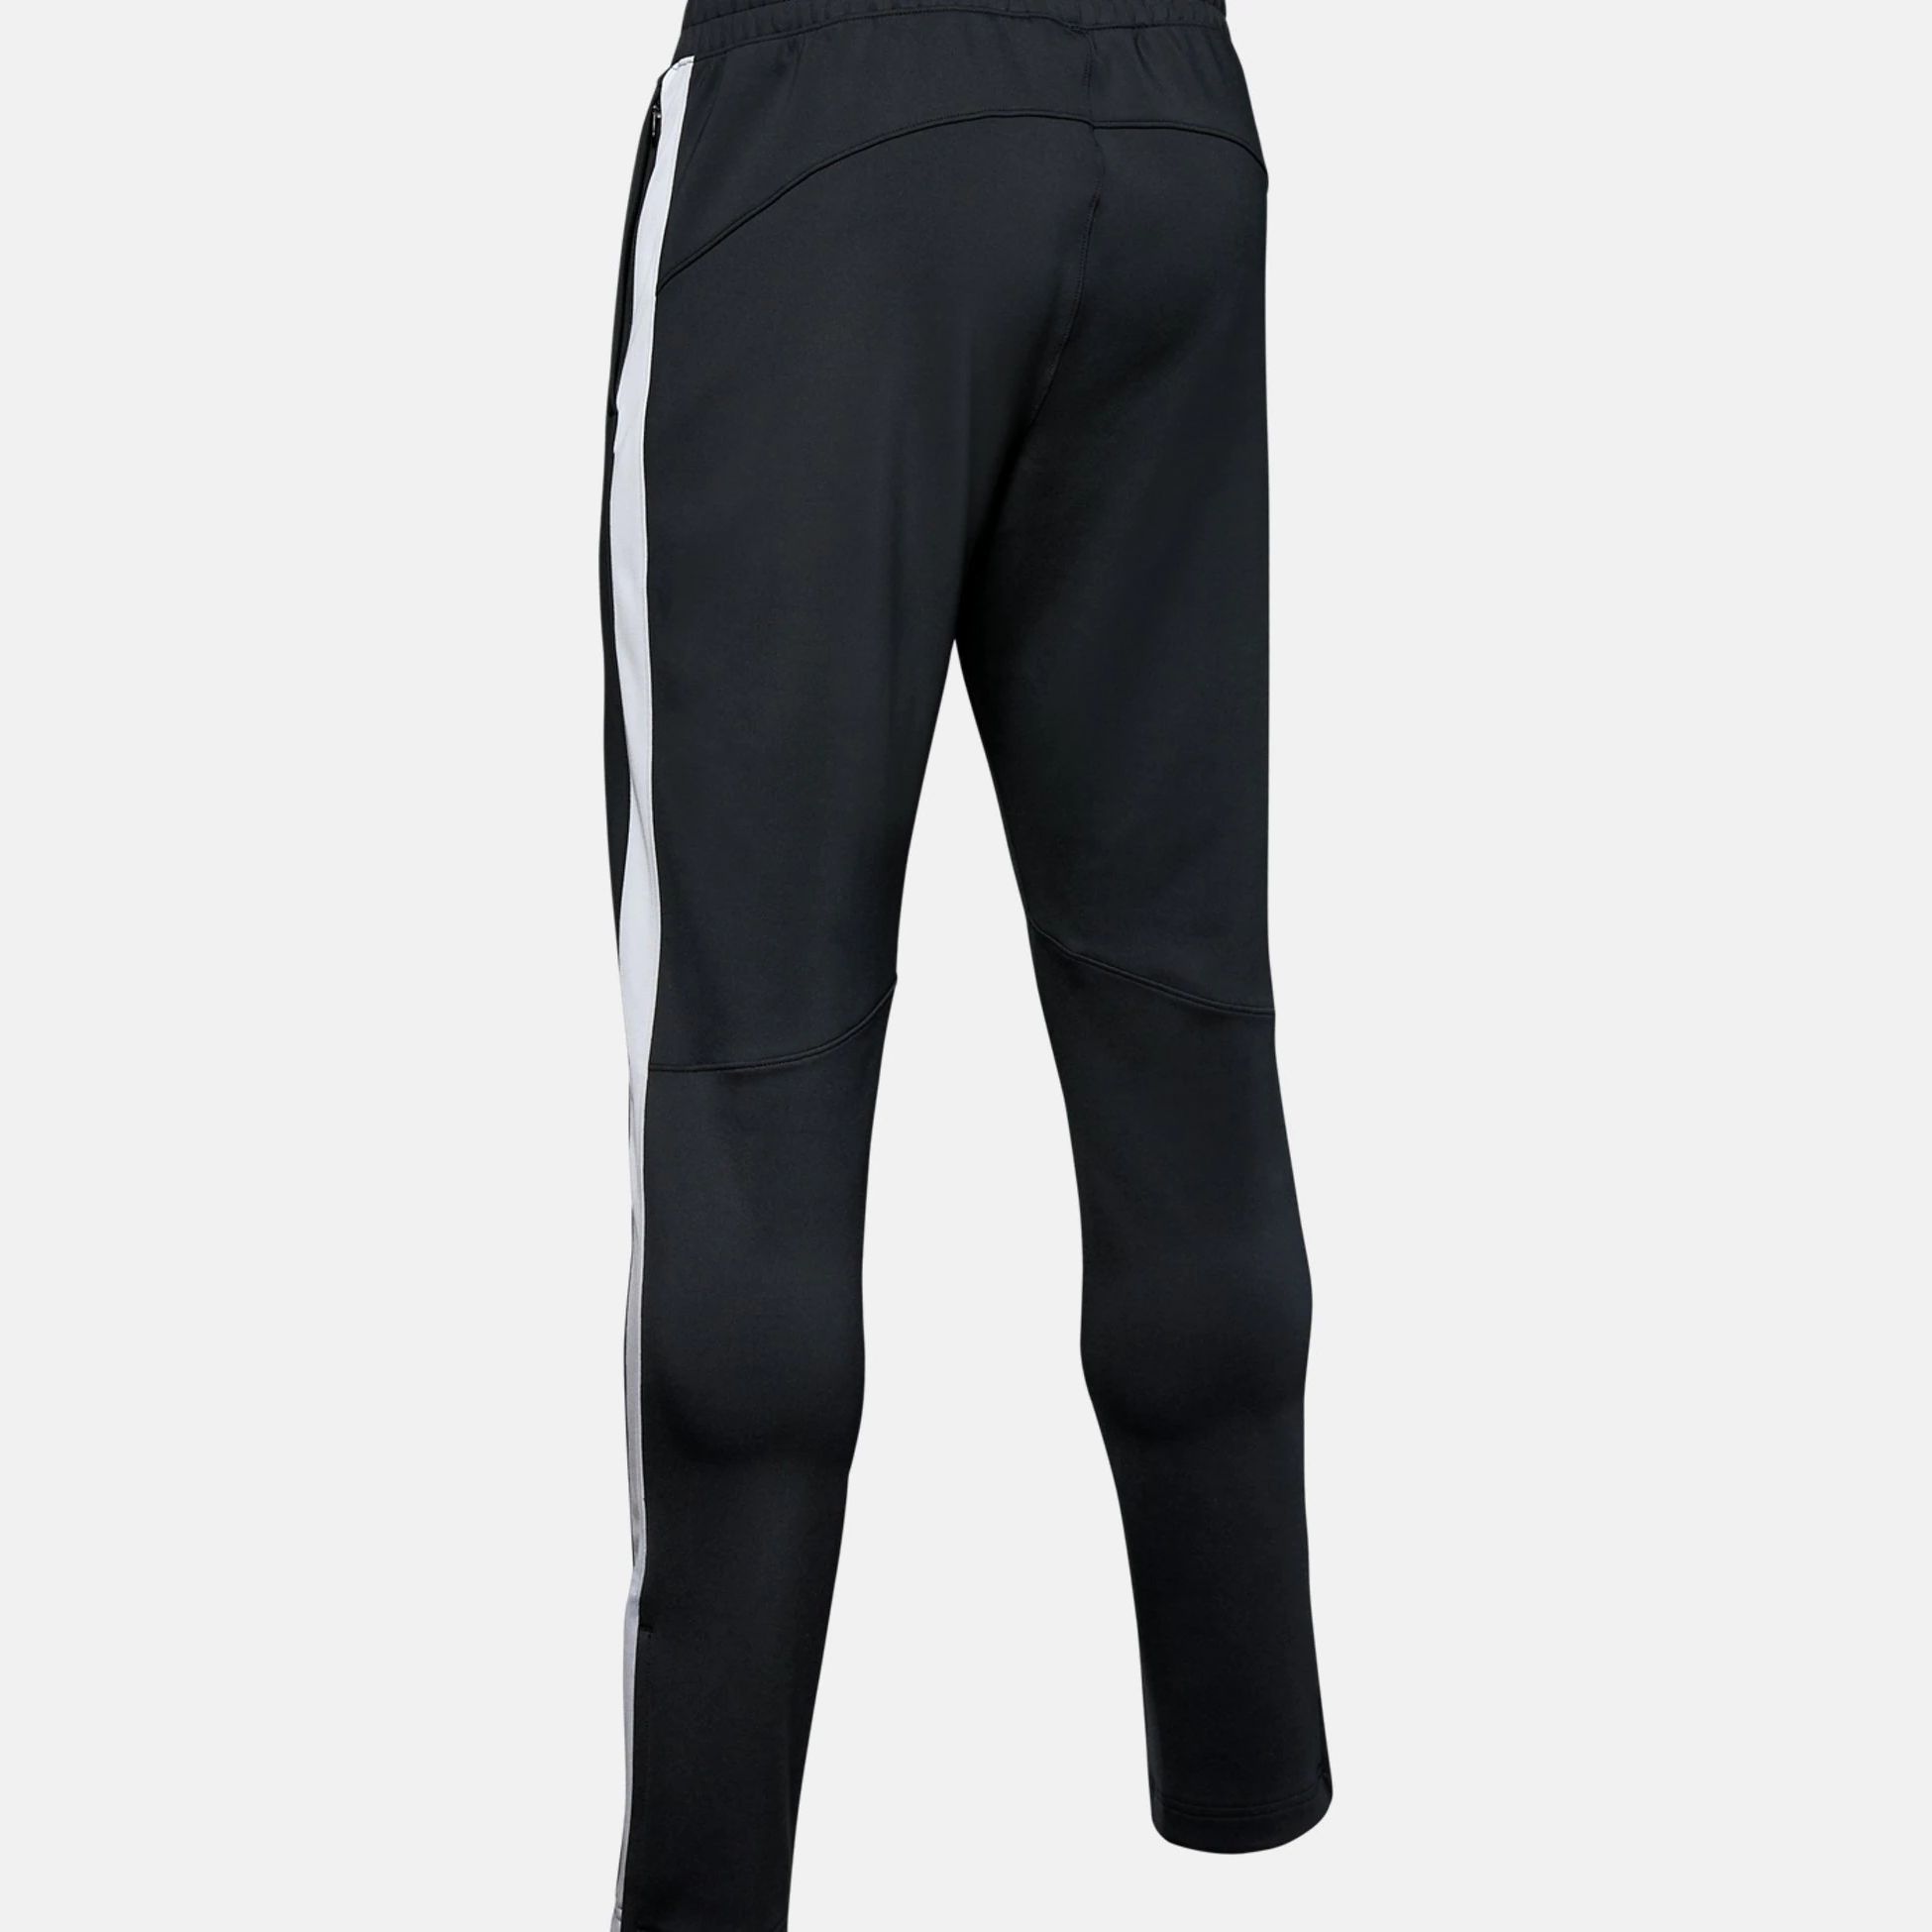 Under Rock armour & | Pants | Sweatpants Joggers Track Project Clothing 7262